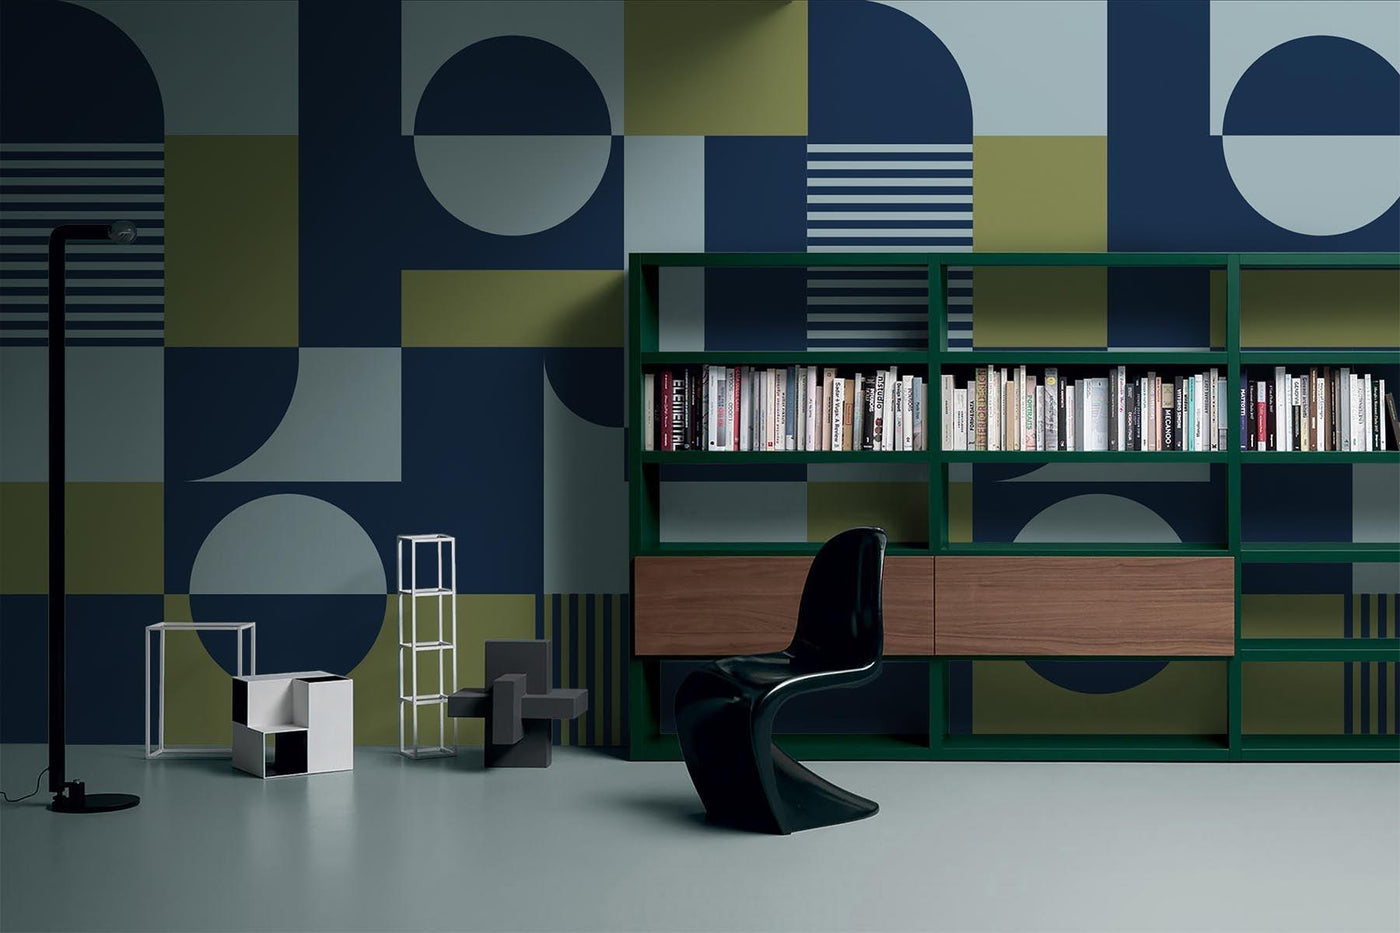 blue and green graphic wall mural on the wall of this living room. Shiny epoxy floor in grey. Green bookshelf with wooden doors. Black plastic chair